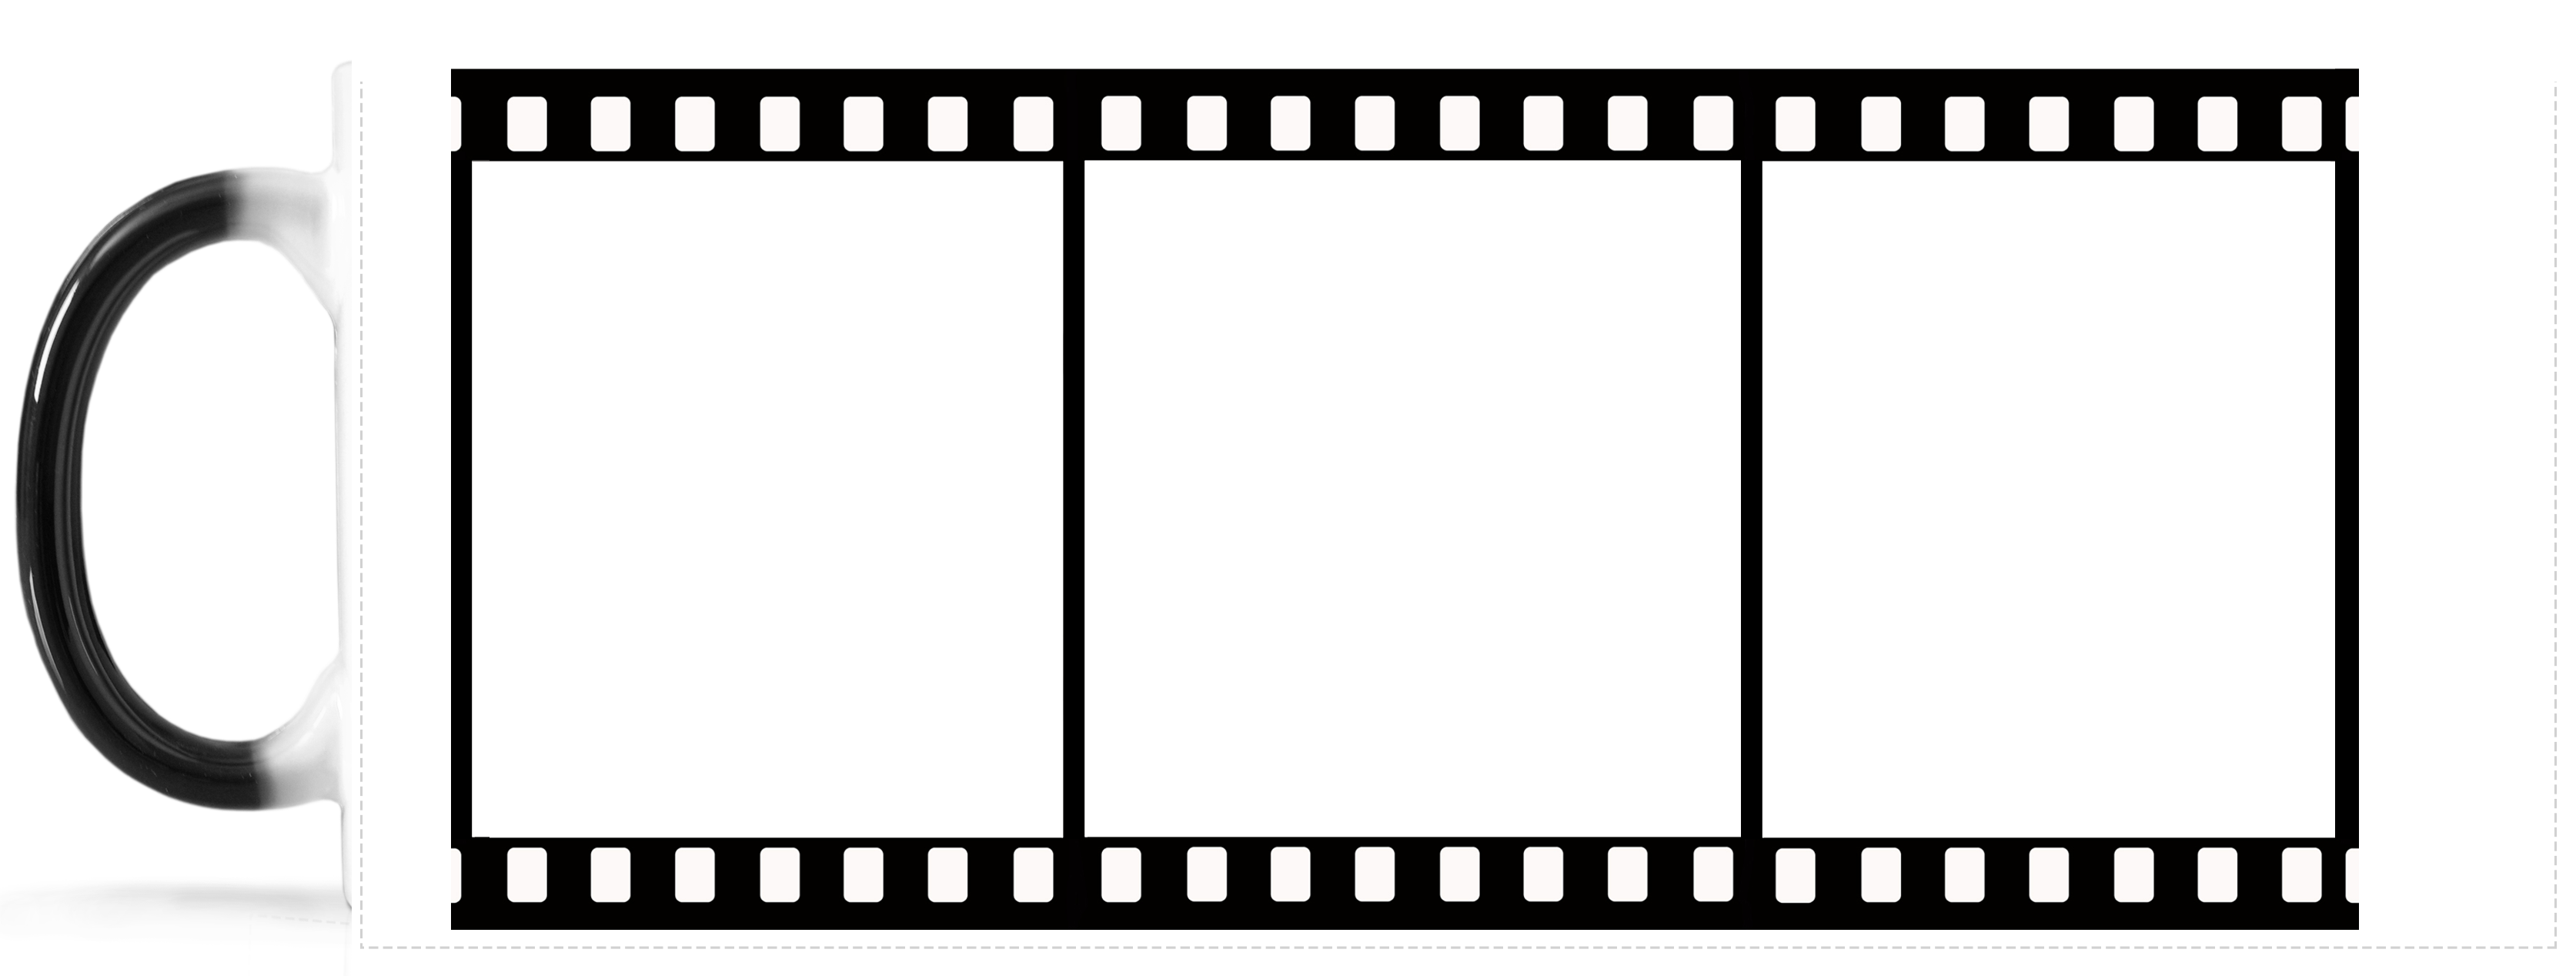 kodak film frame clipart 10 free Cliparts | Download images on